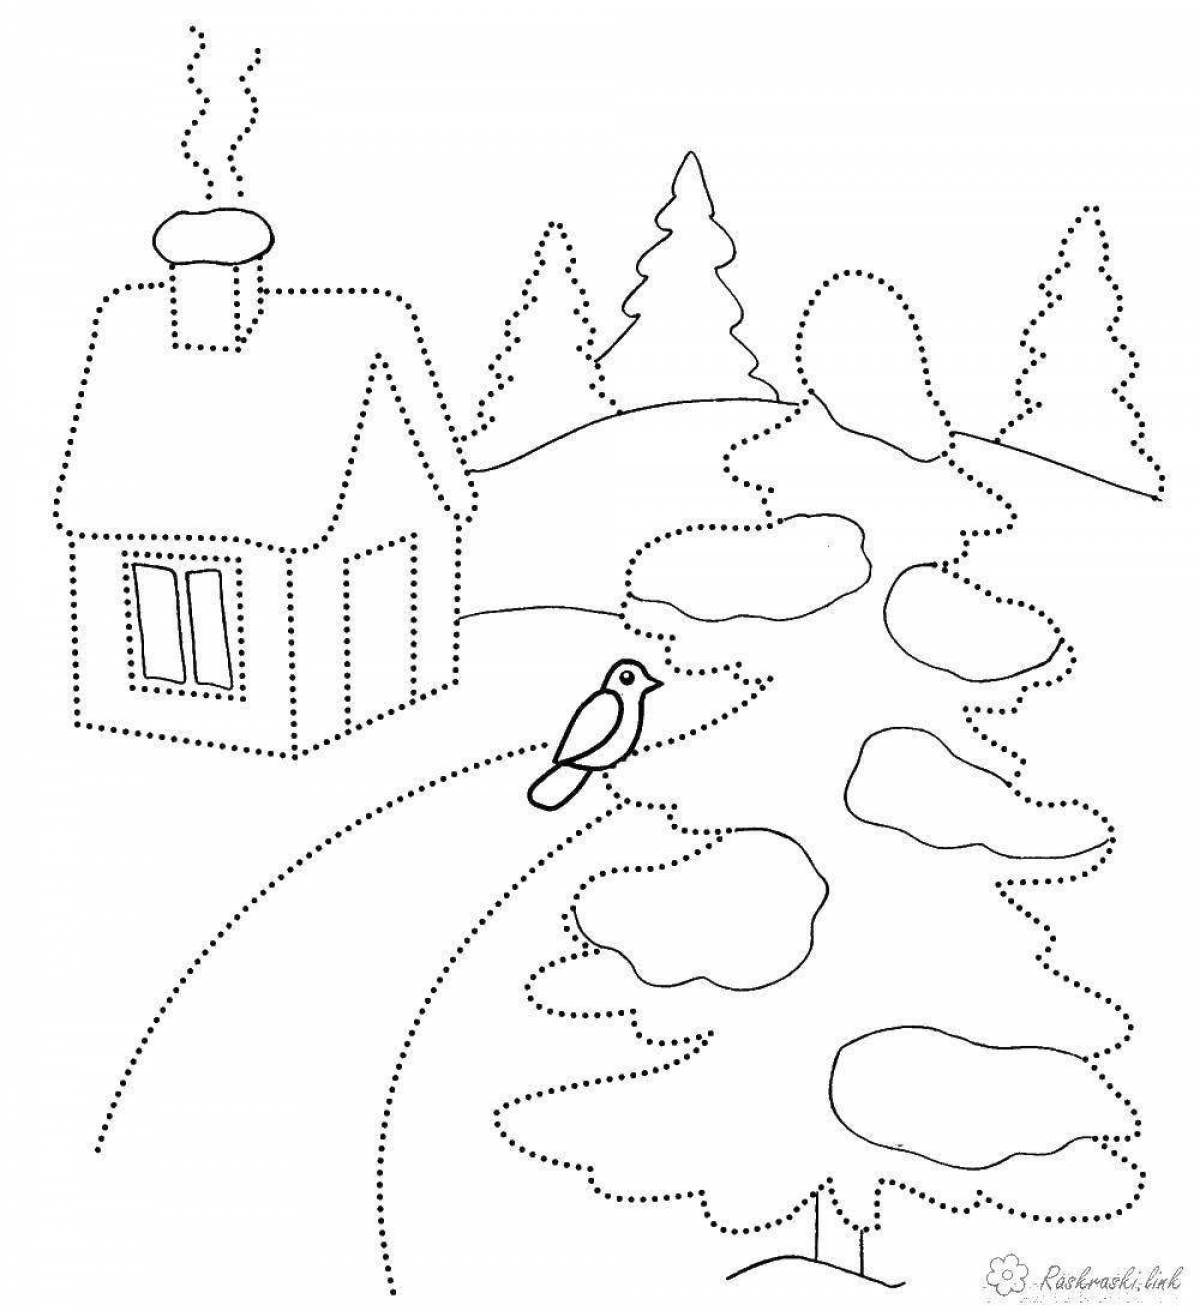 Inspiring winter landscape coloring book for 3-4 year olds